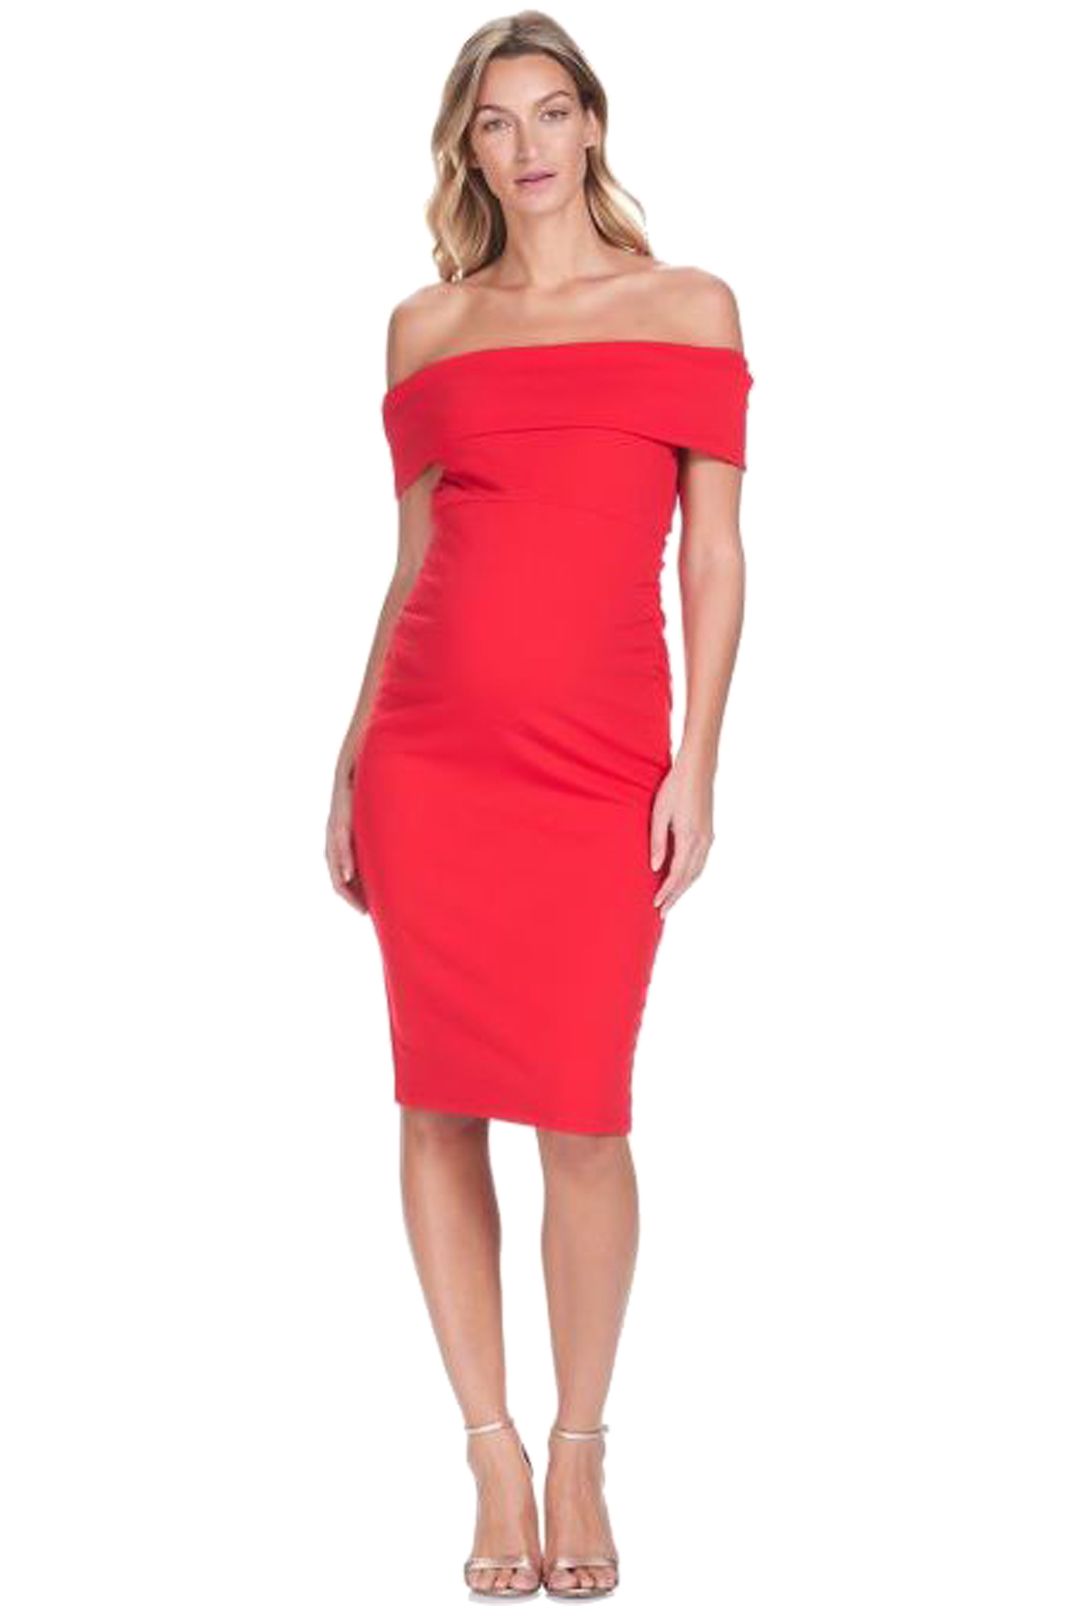 Claire Off Shoulder Dress - Red by Soon Maternity for Hire | GlamCorner